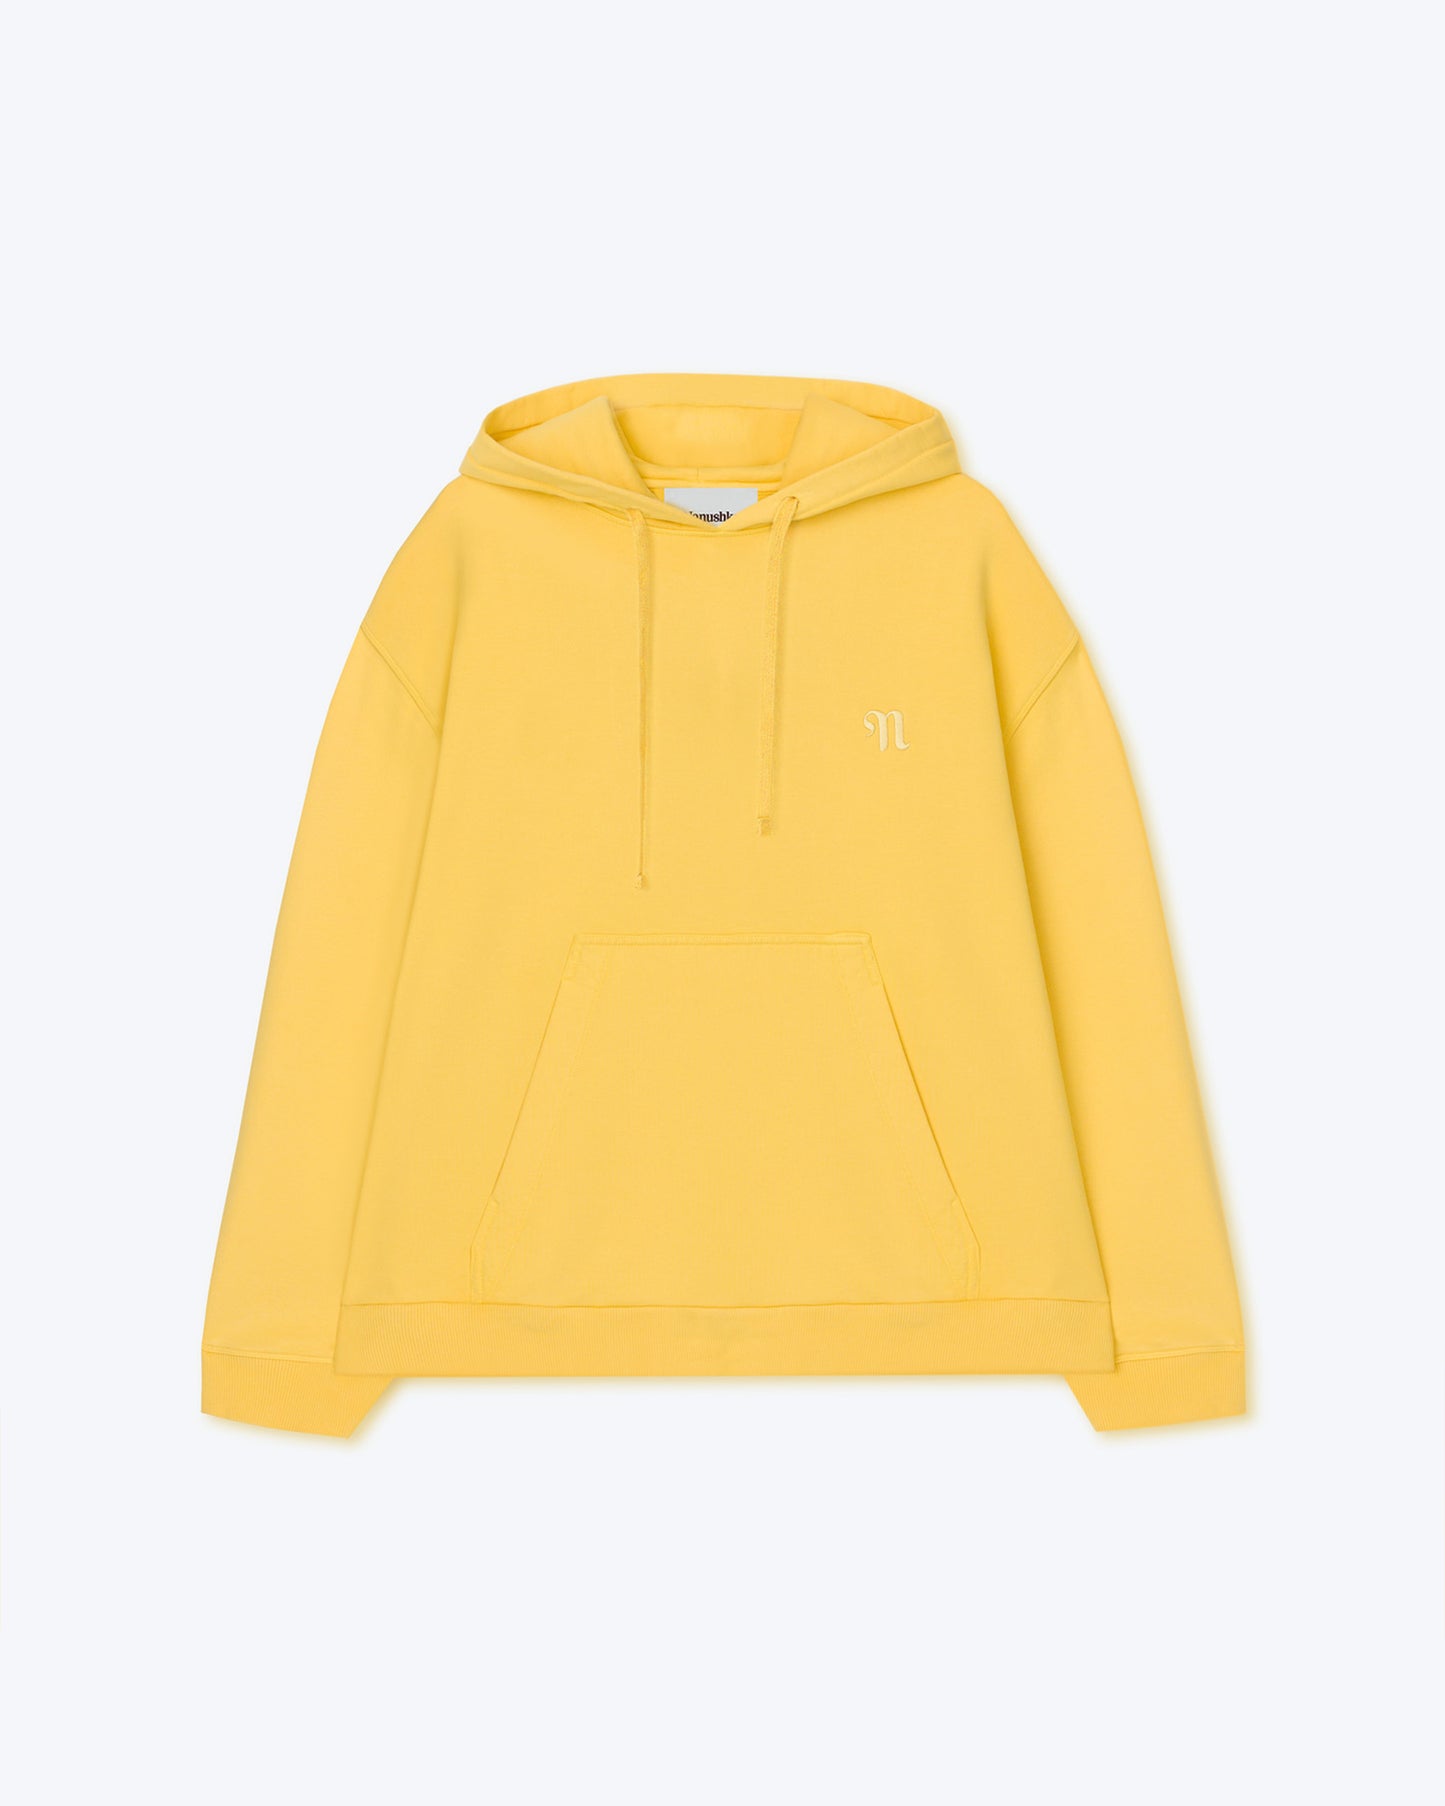 Ever - Recycled Cotton Logo Hoodie - Marigold